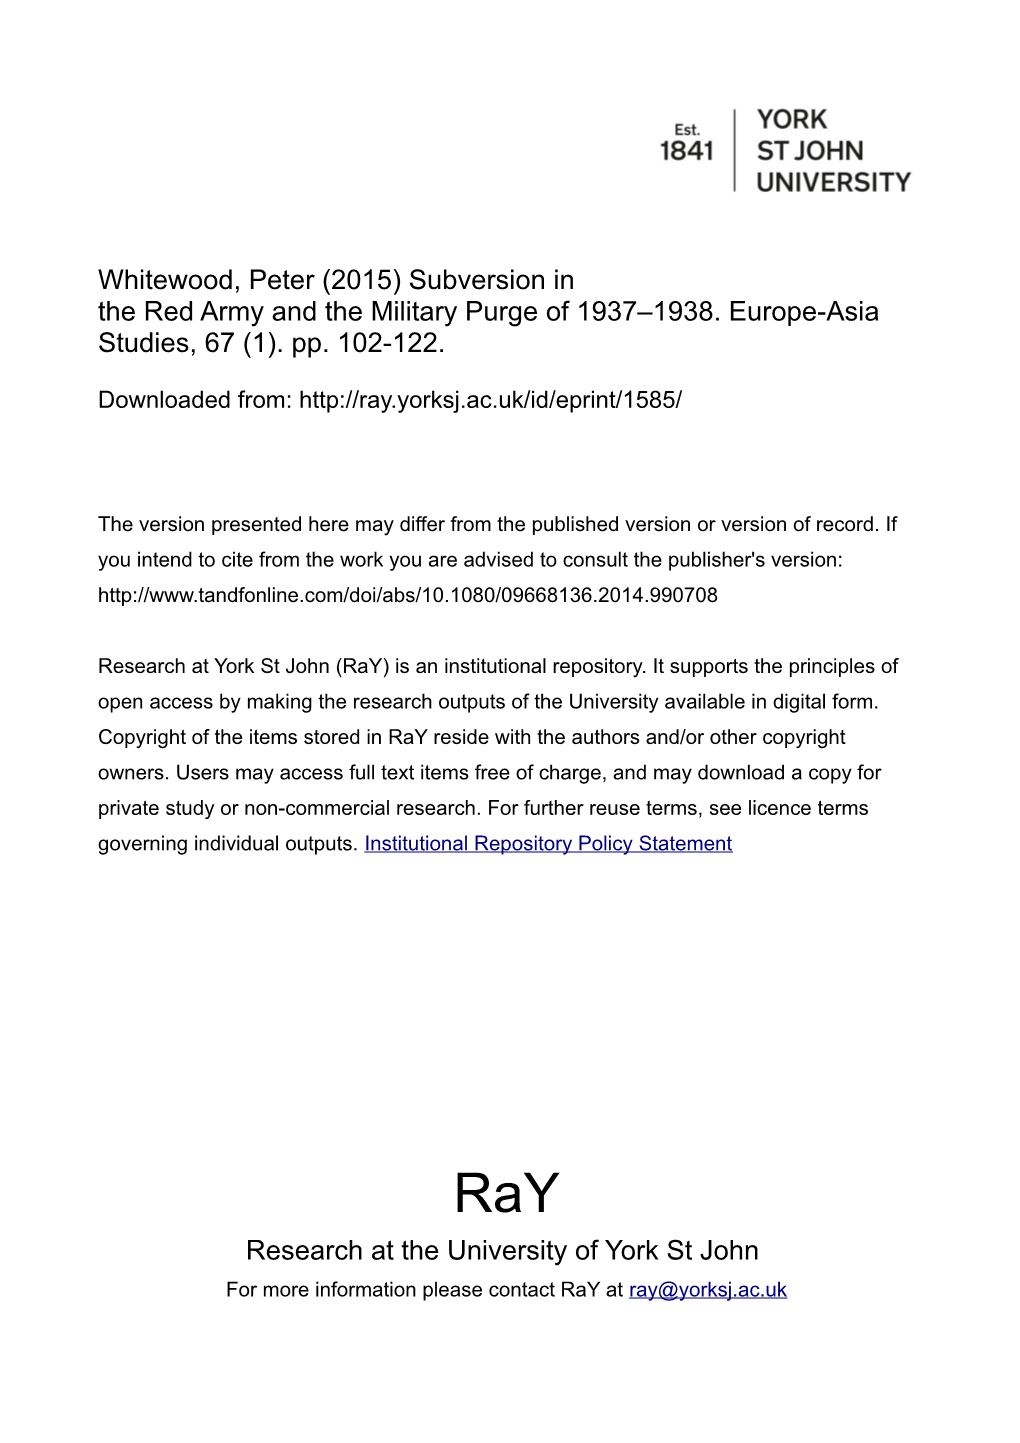 Whitewood, Peter (2015) Subversion in the Red Army and the Military Purge of 1937–1938. Europe-Asia Studies, 67 (1). Pp. 102-122